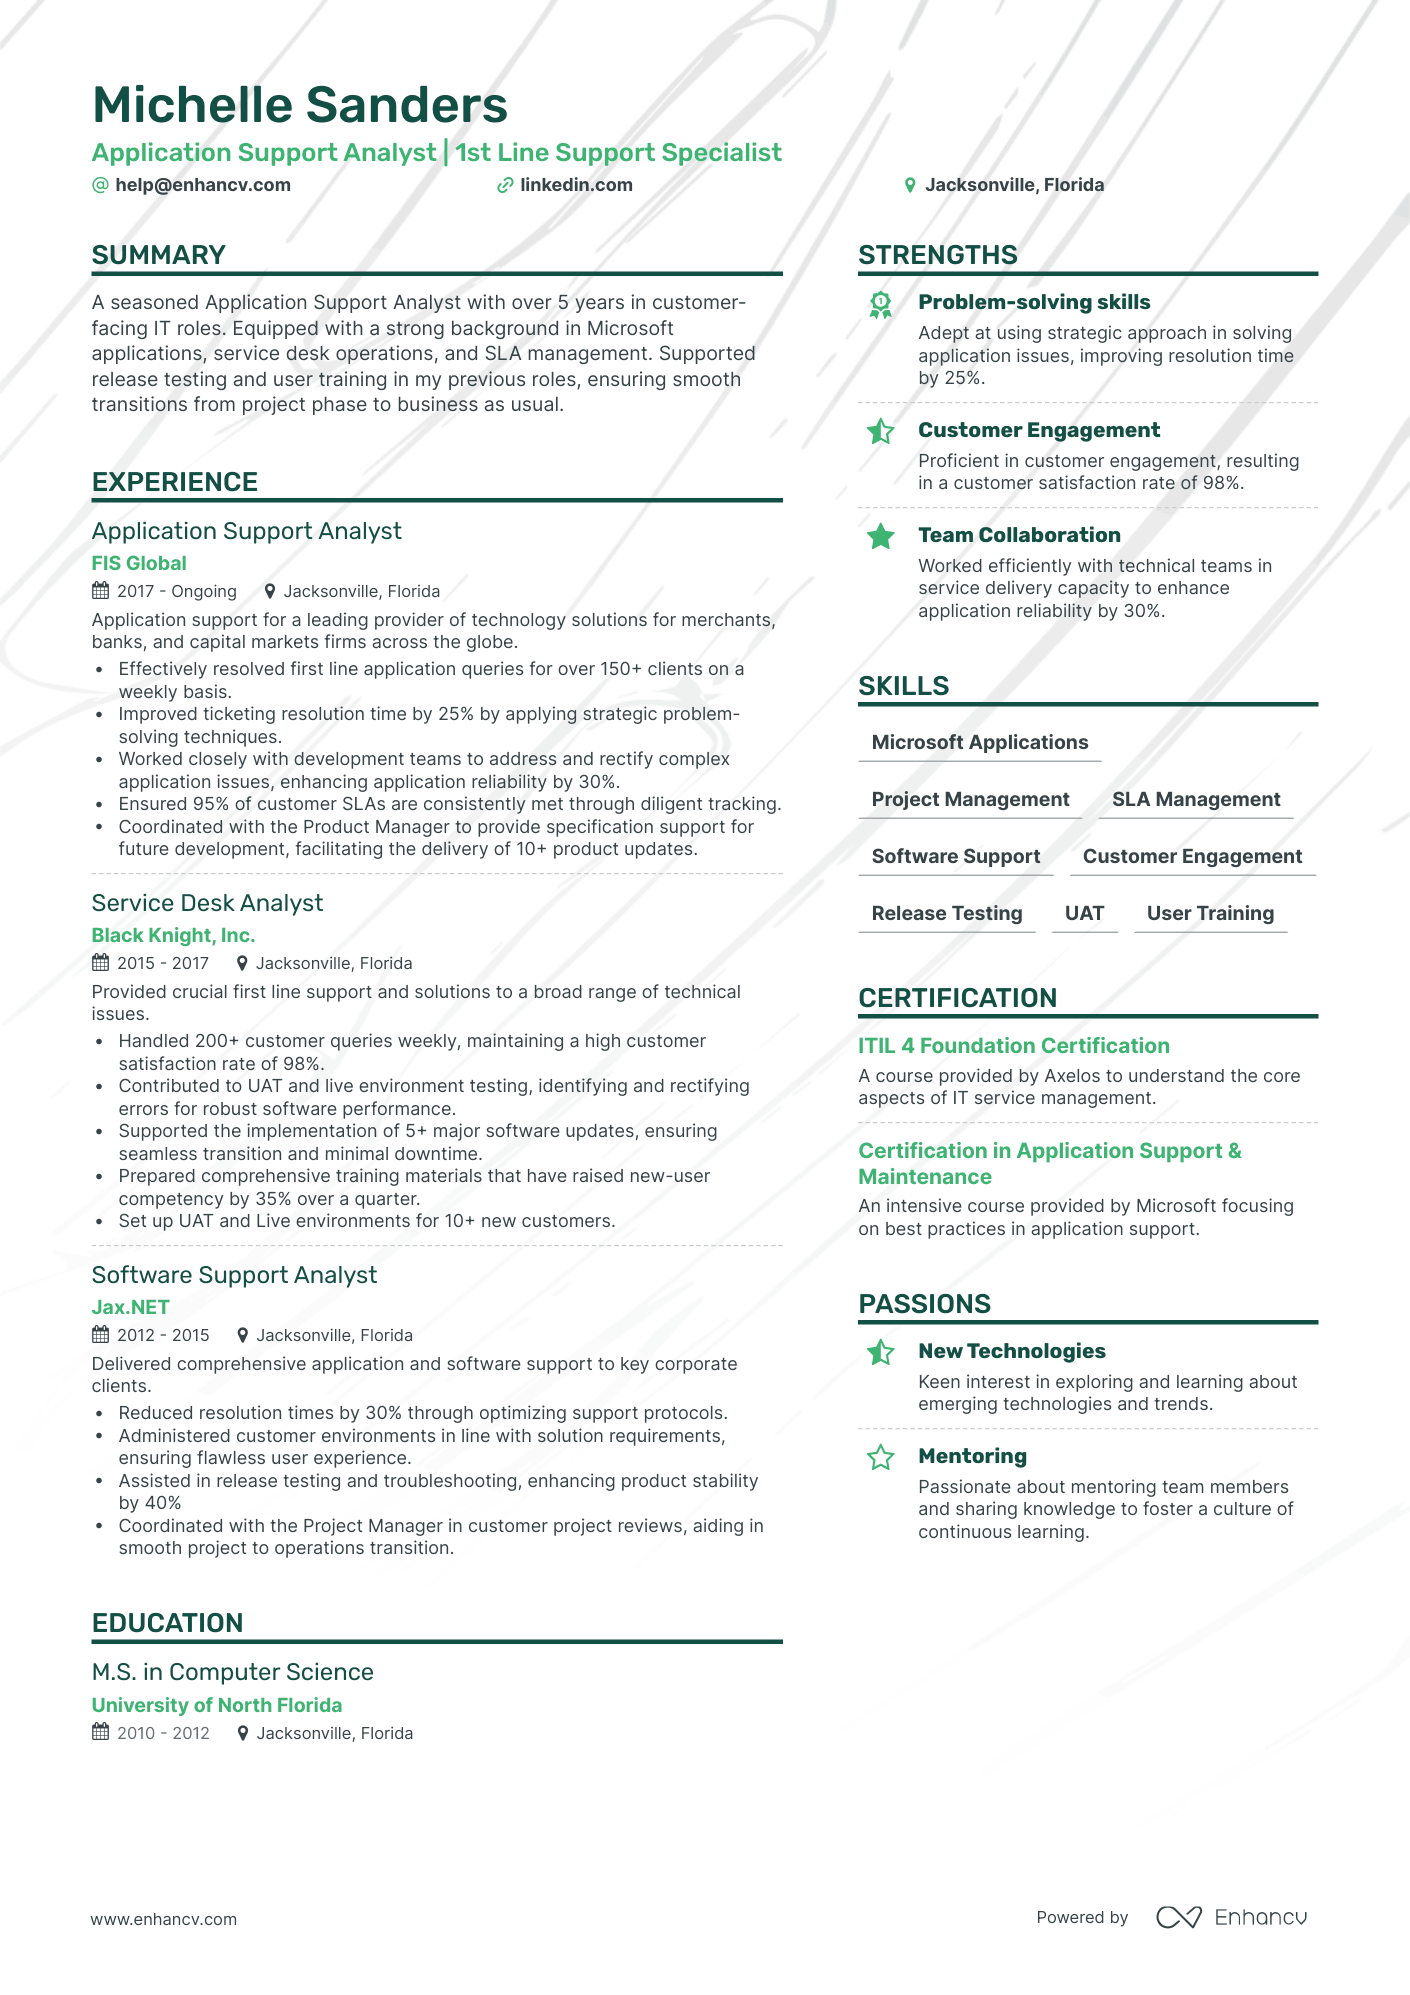 resume of application support analyst